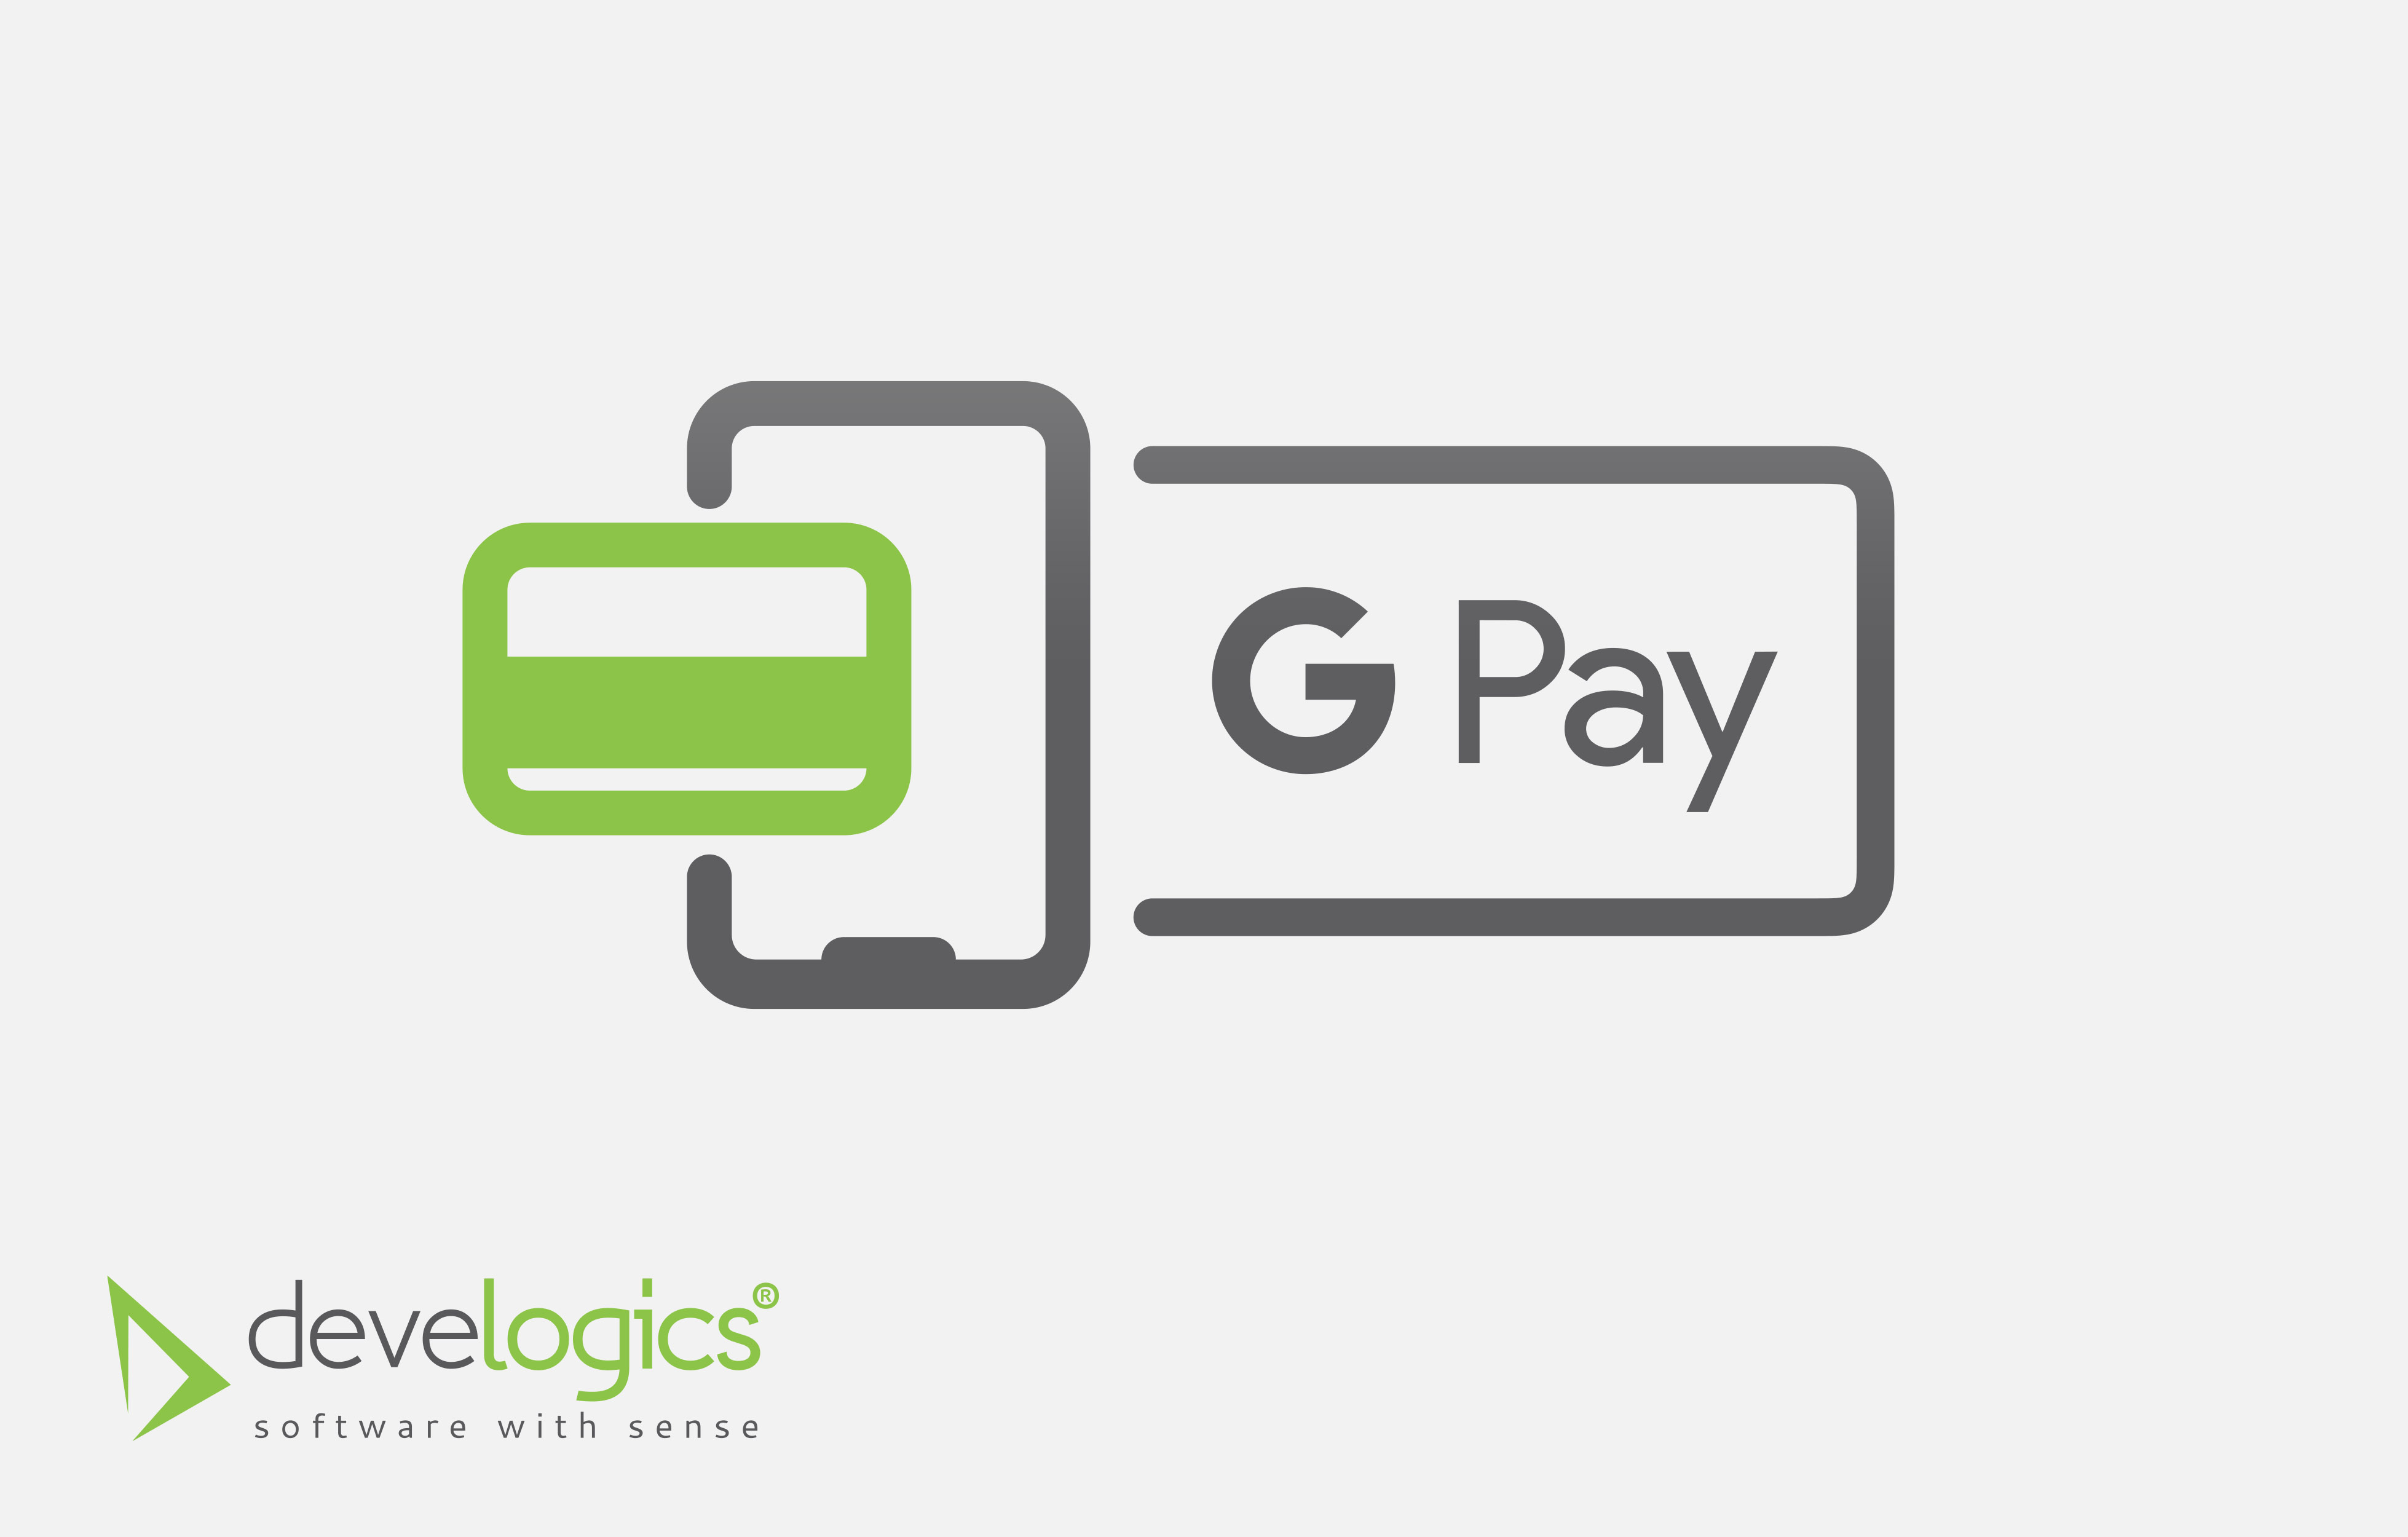 Integration with Google Pay